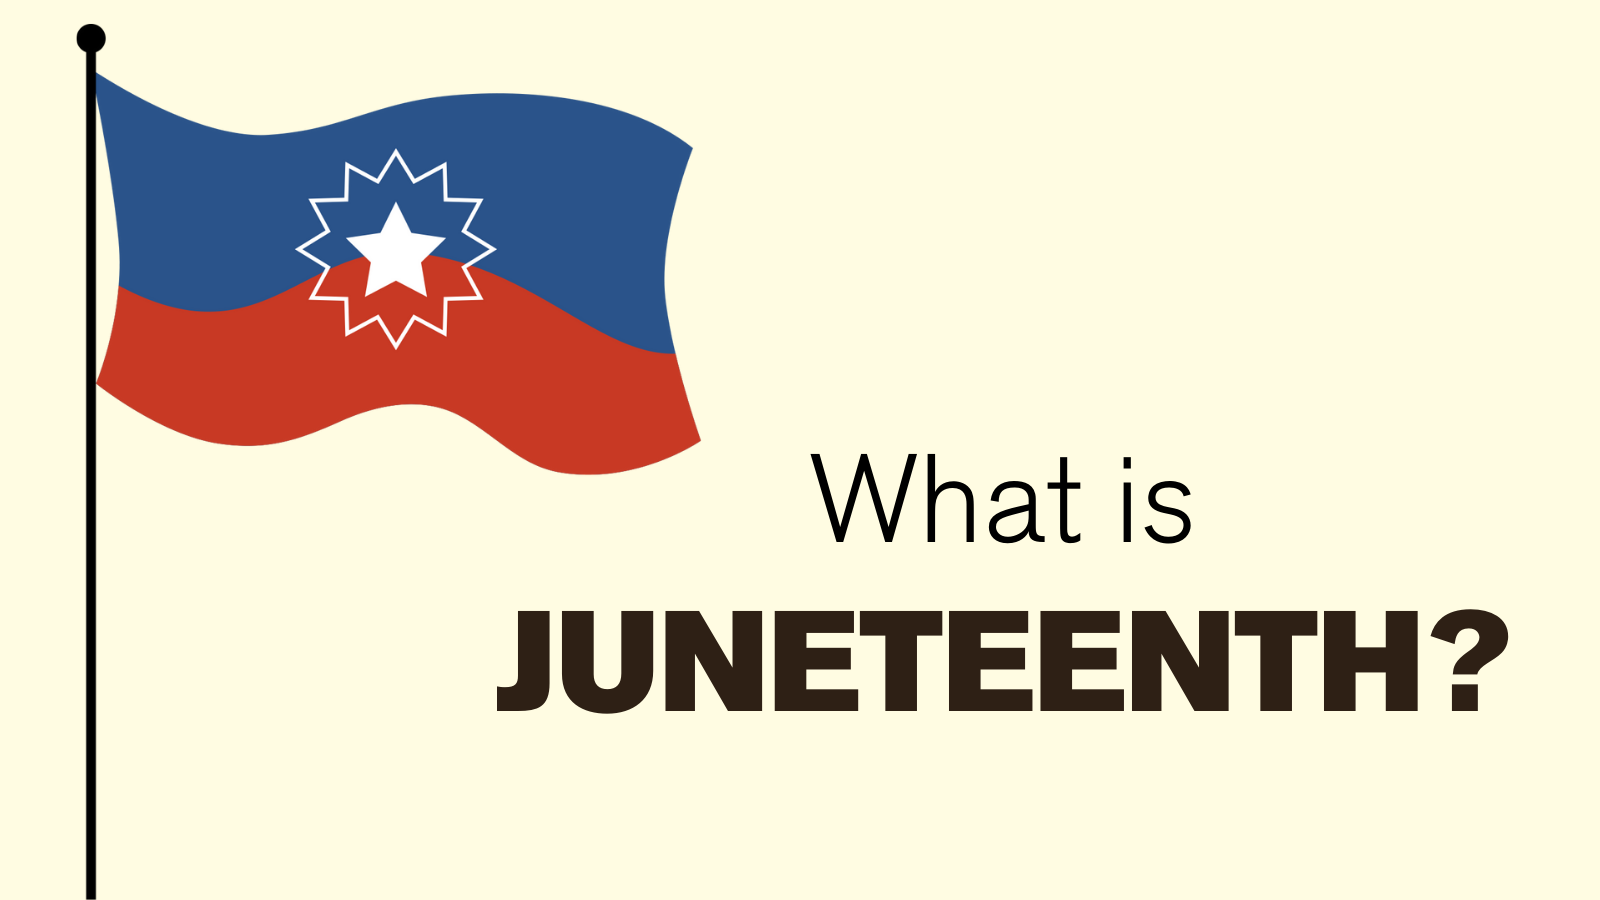 WHY DO WE CELEBRATE JUNETEENTH?